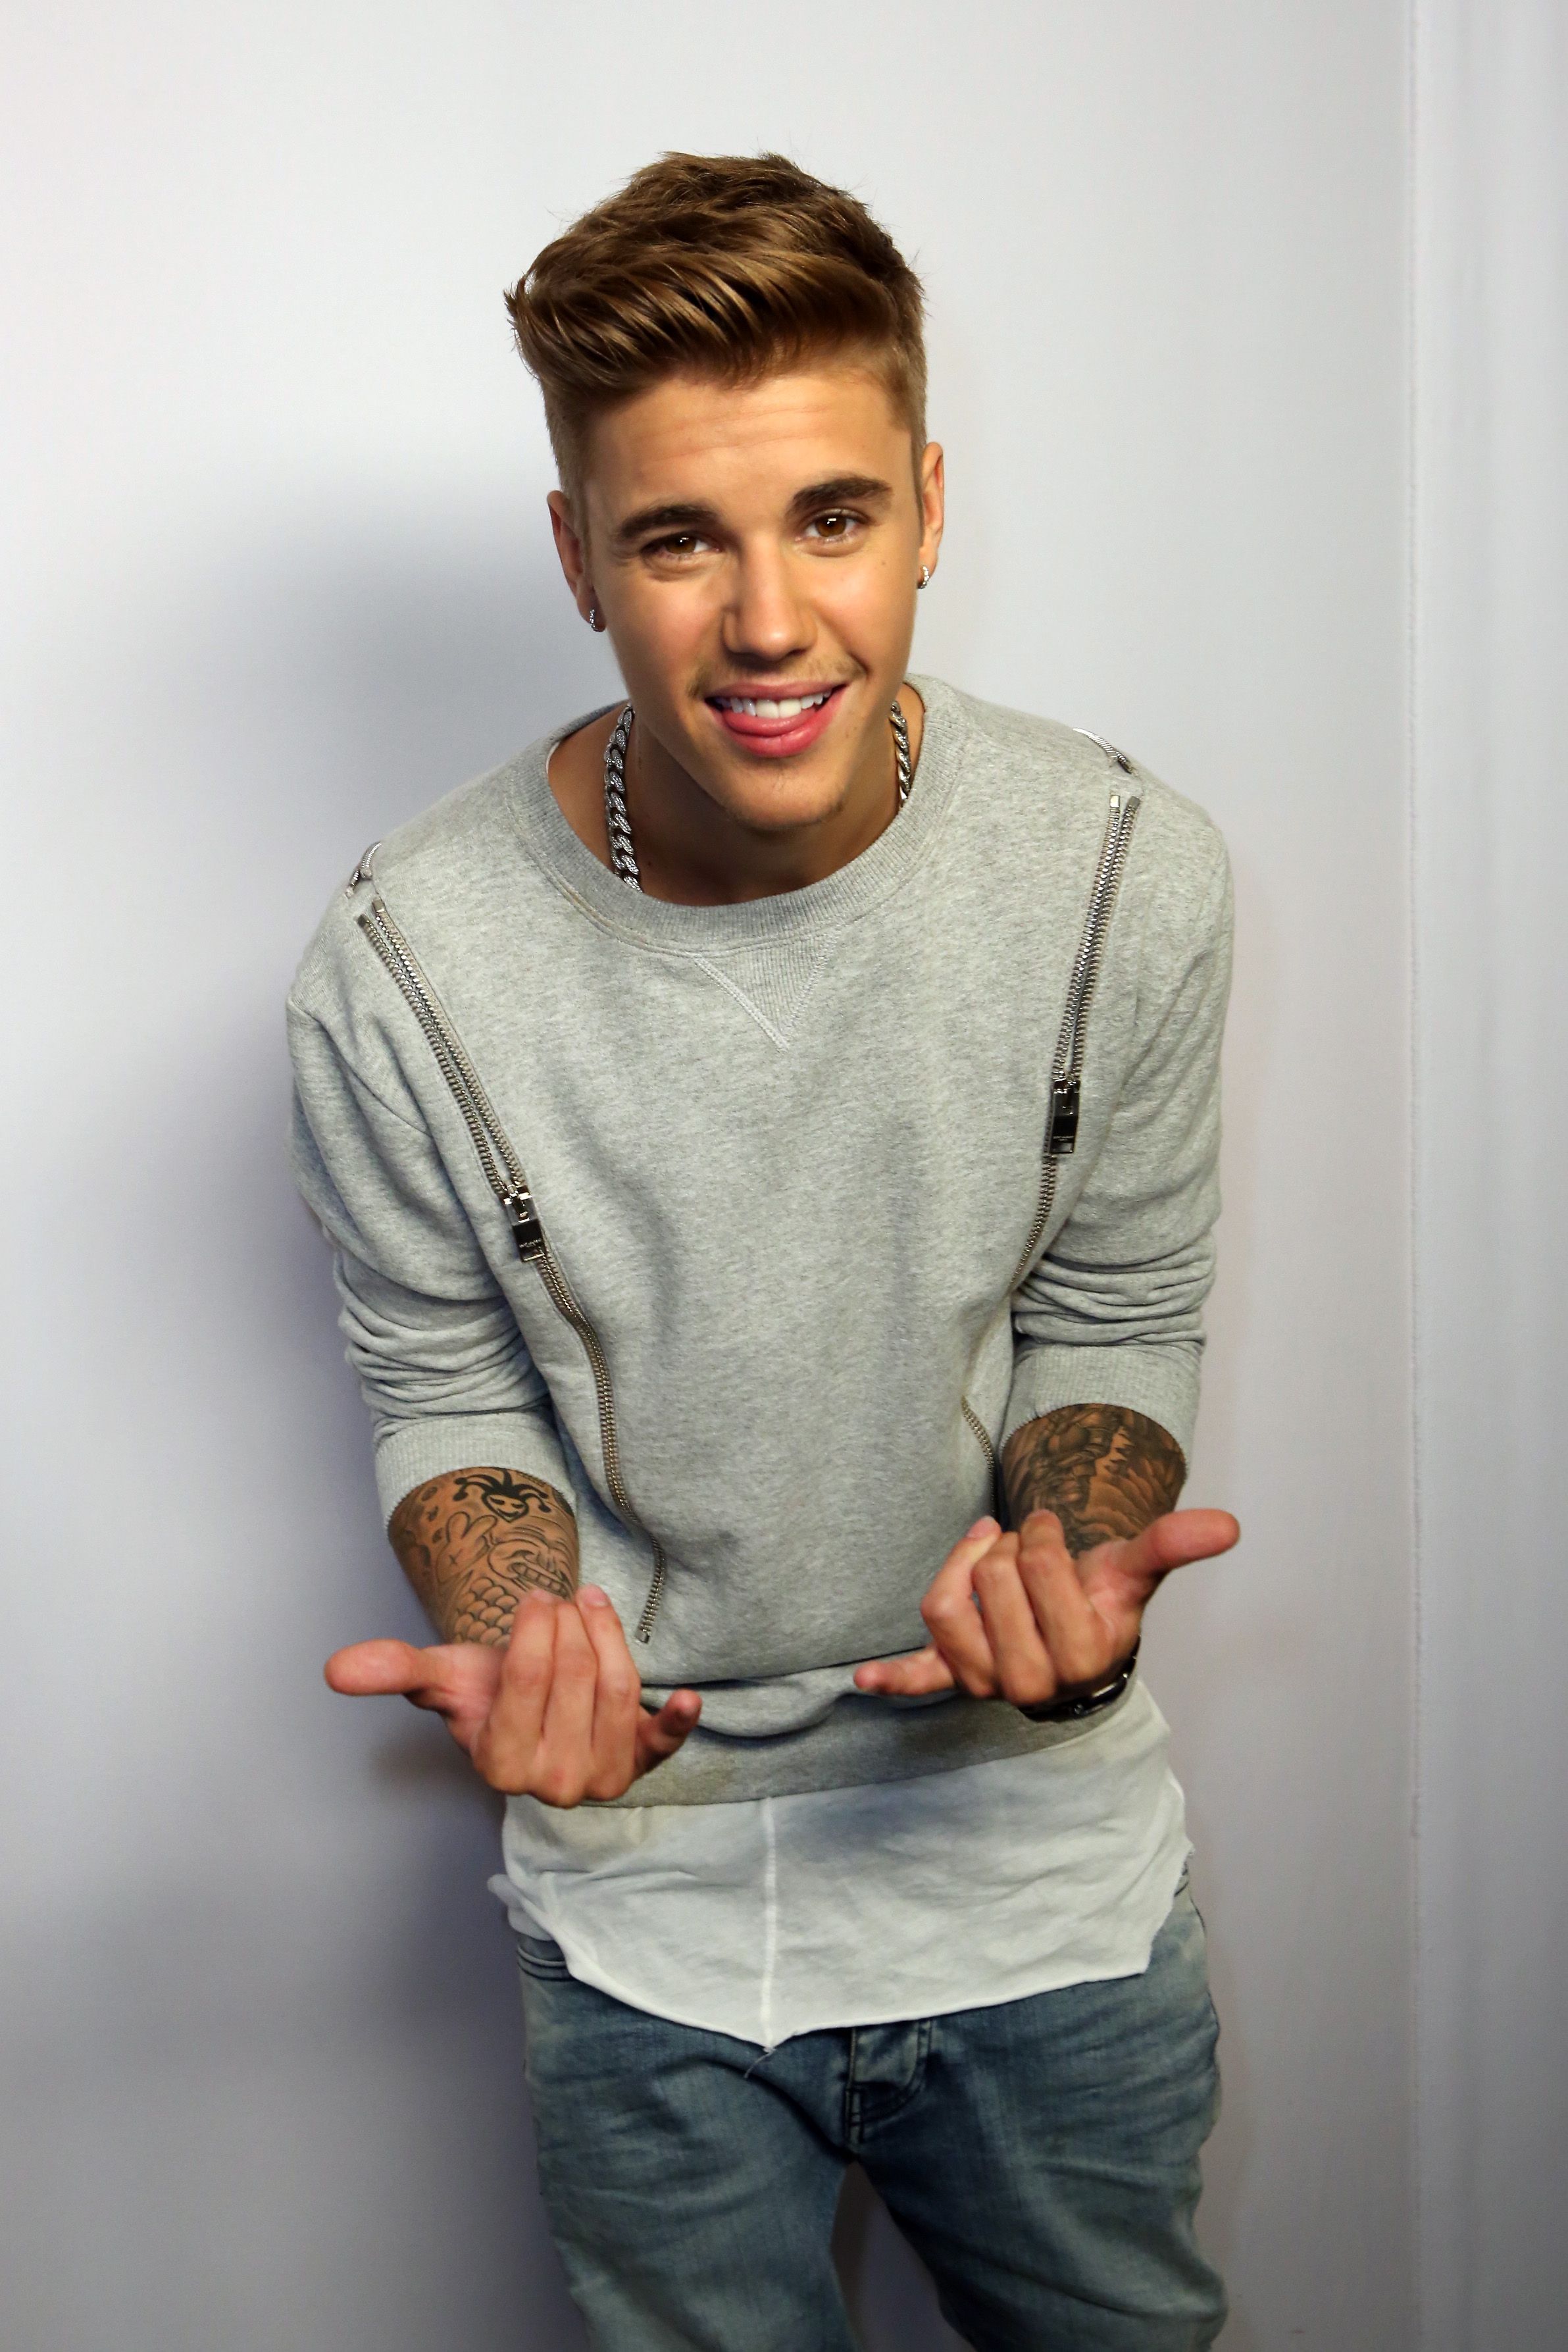 singer-songwriter-justin-bieber-attends-the-2014-young-news-photo-452816022-1543262087.jpg